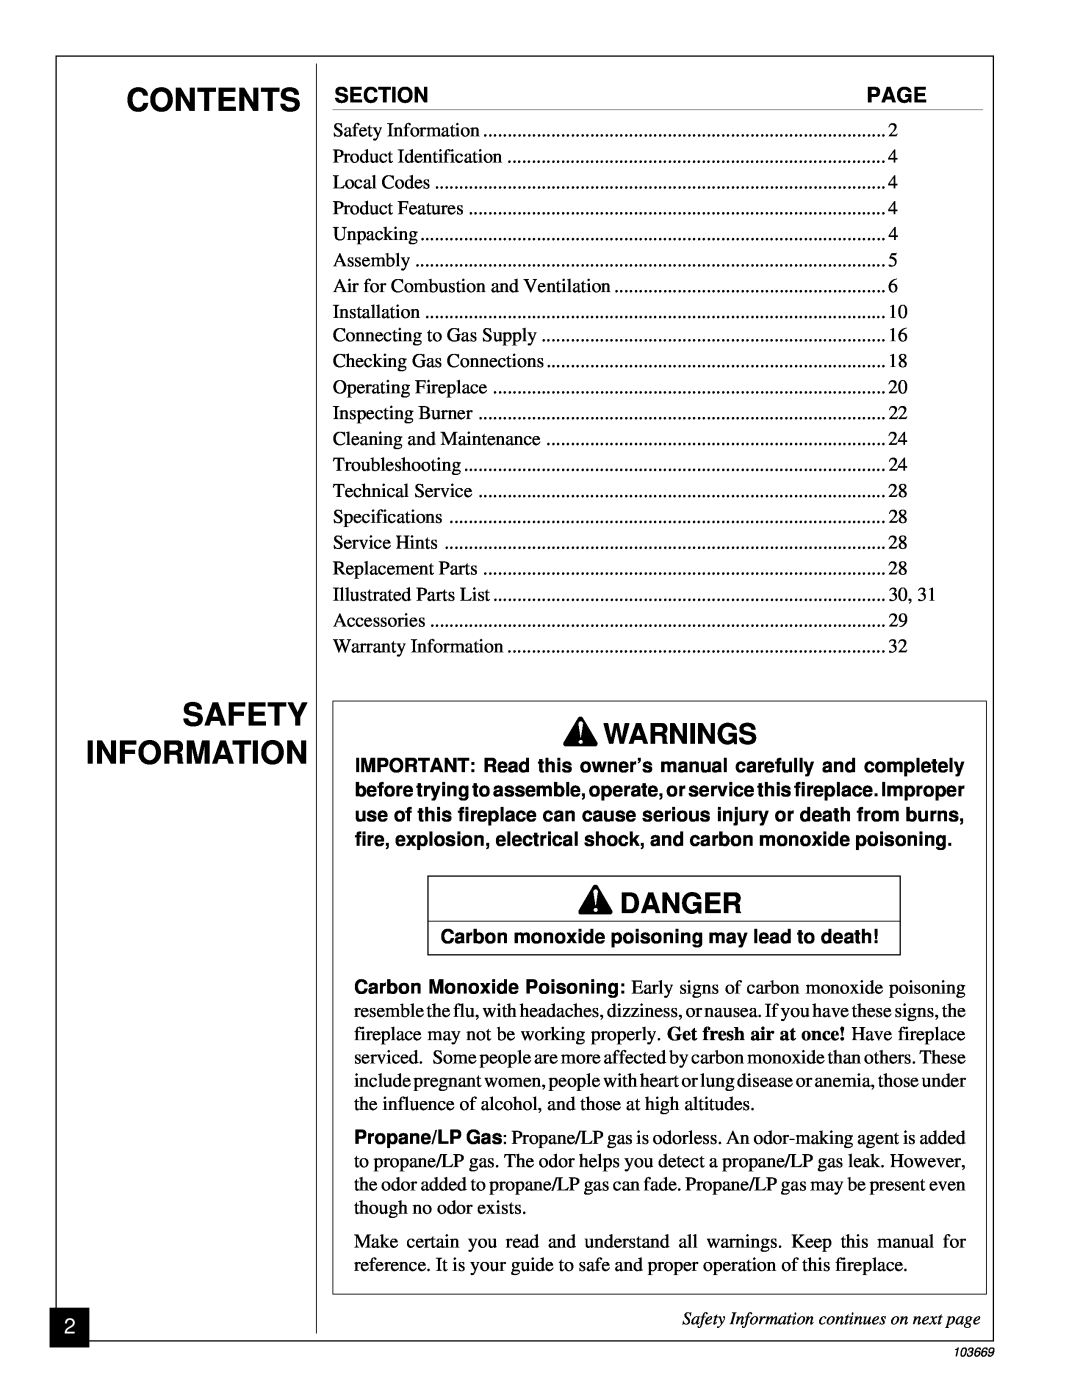 Desa VMH10TP installation manual Contents Safety Information, Danger, Carbon monoxide poisoning may lead to death 